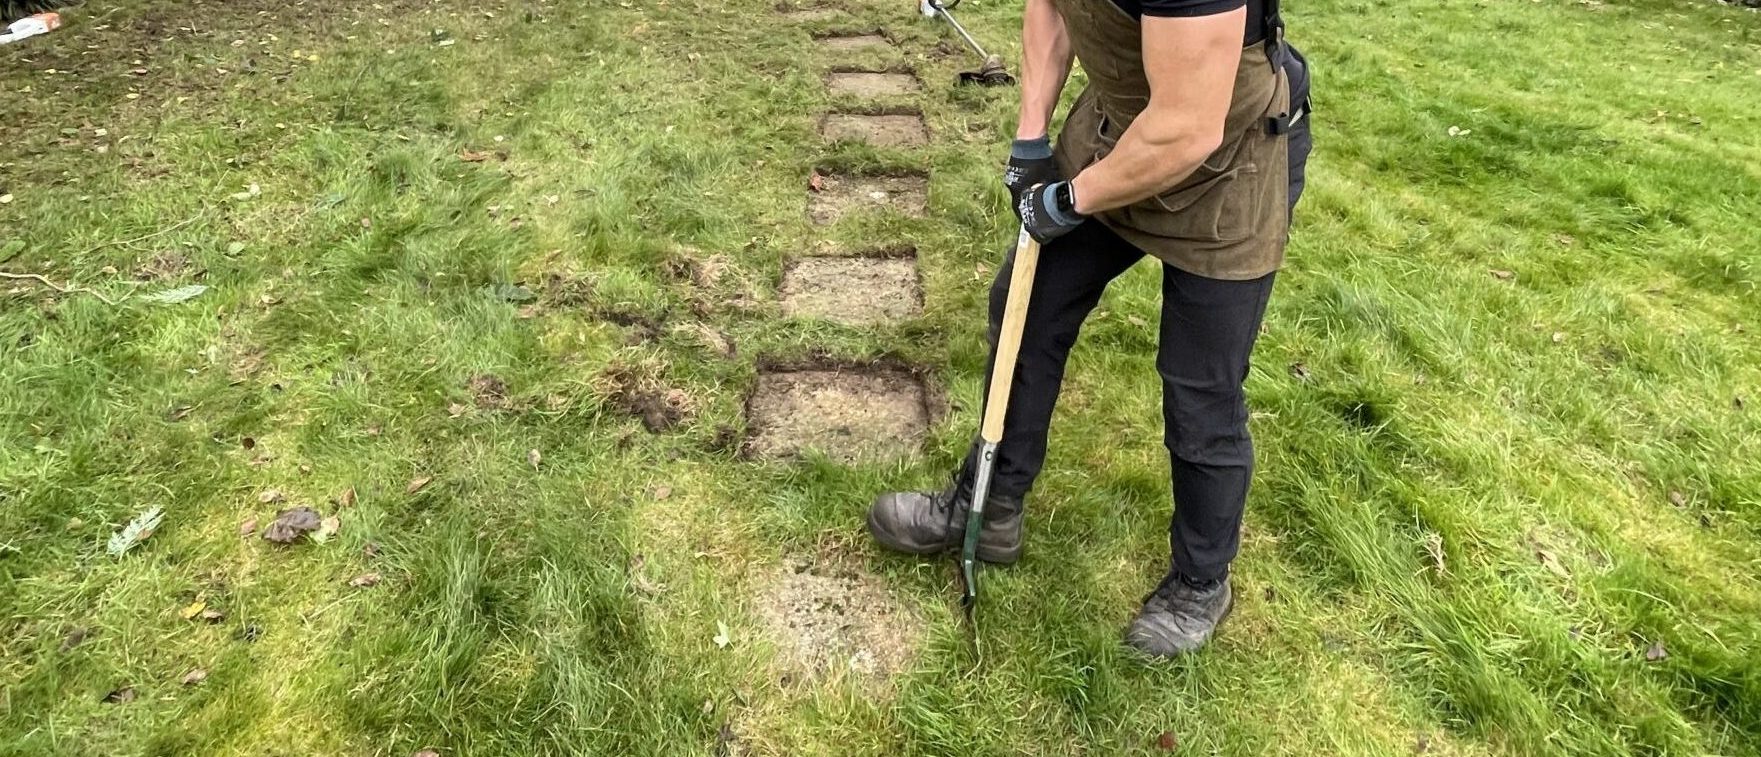 A member of the Willow Alexander Gardens team removing excess grass around a stone tile in a garden